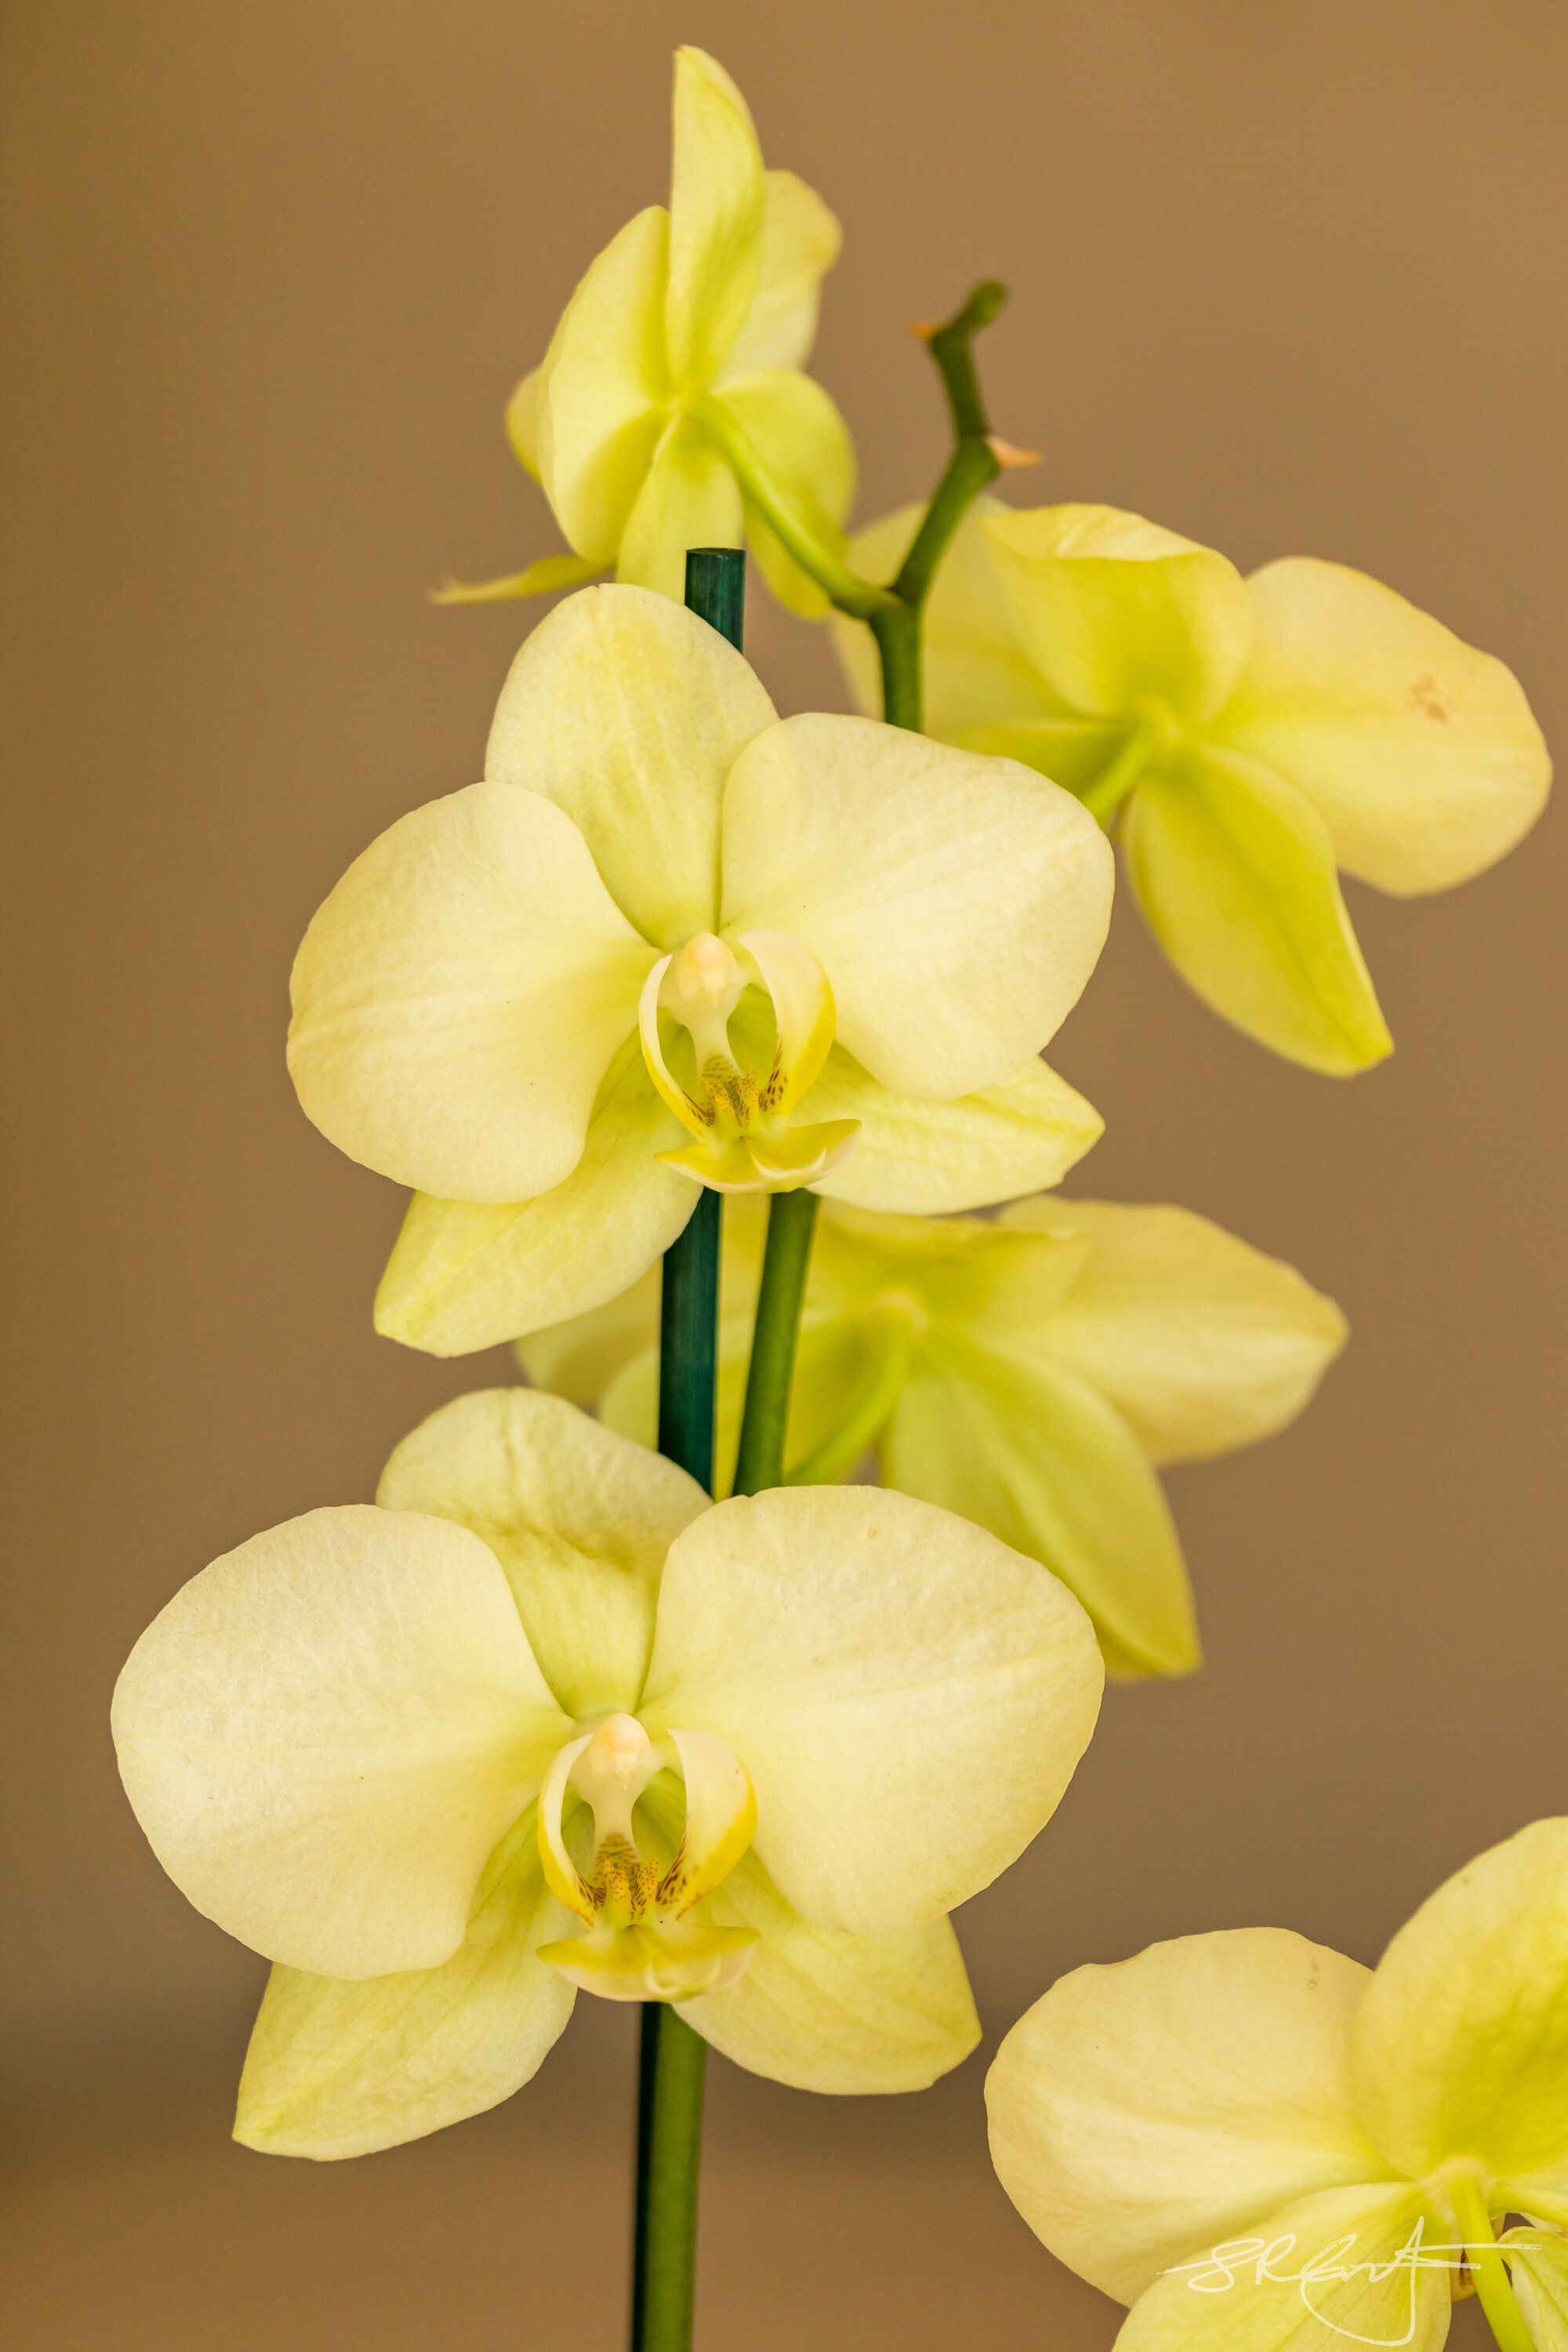 Pale Yellow Orchid.  Patti received several orchids after her surgery.